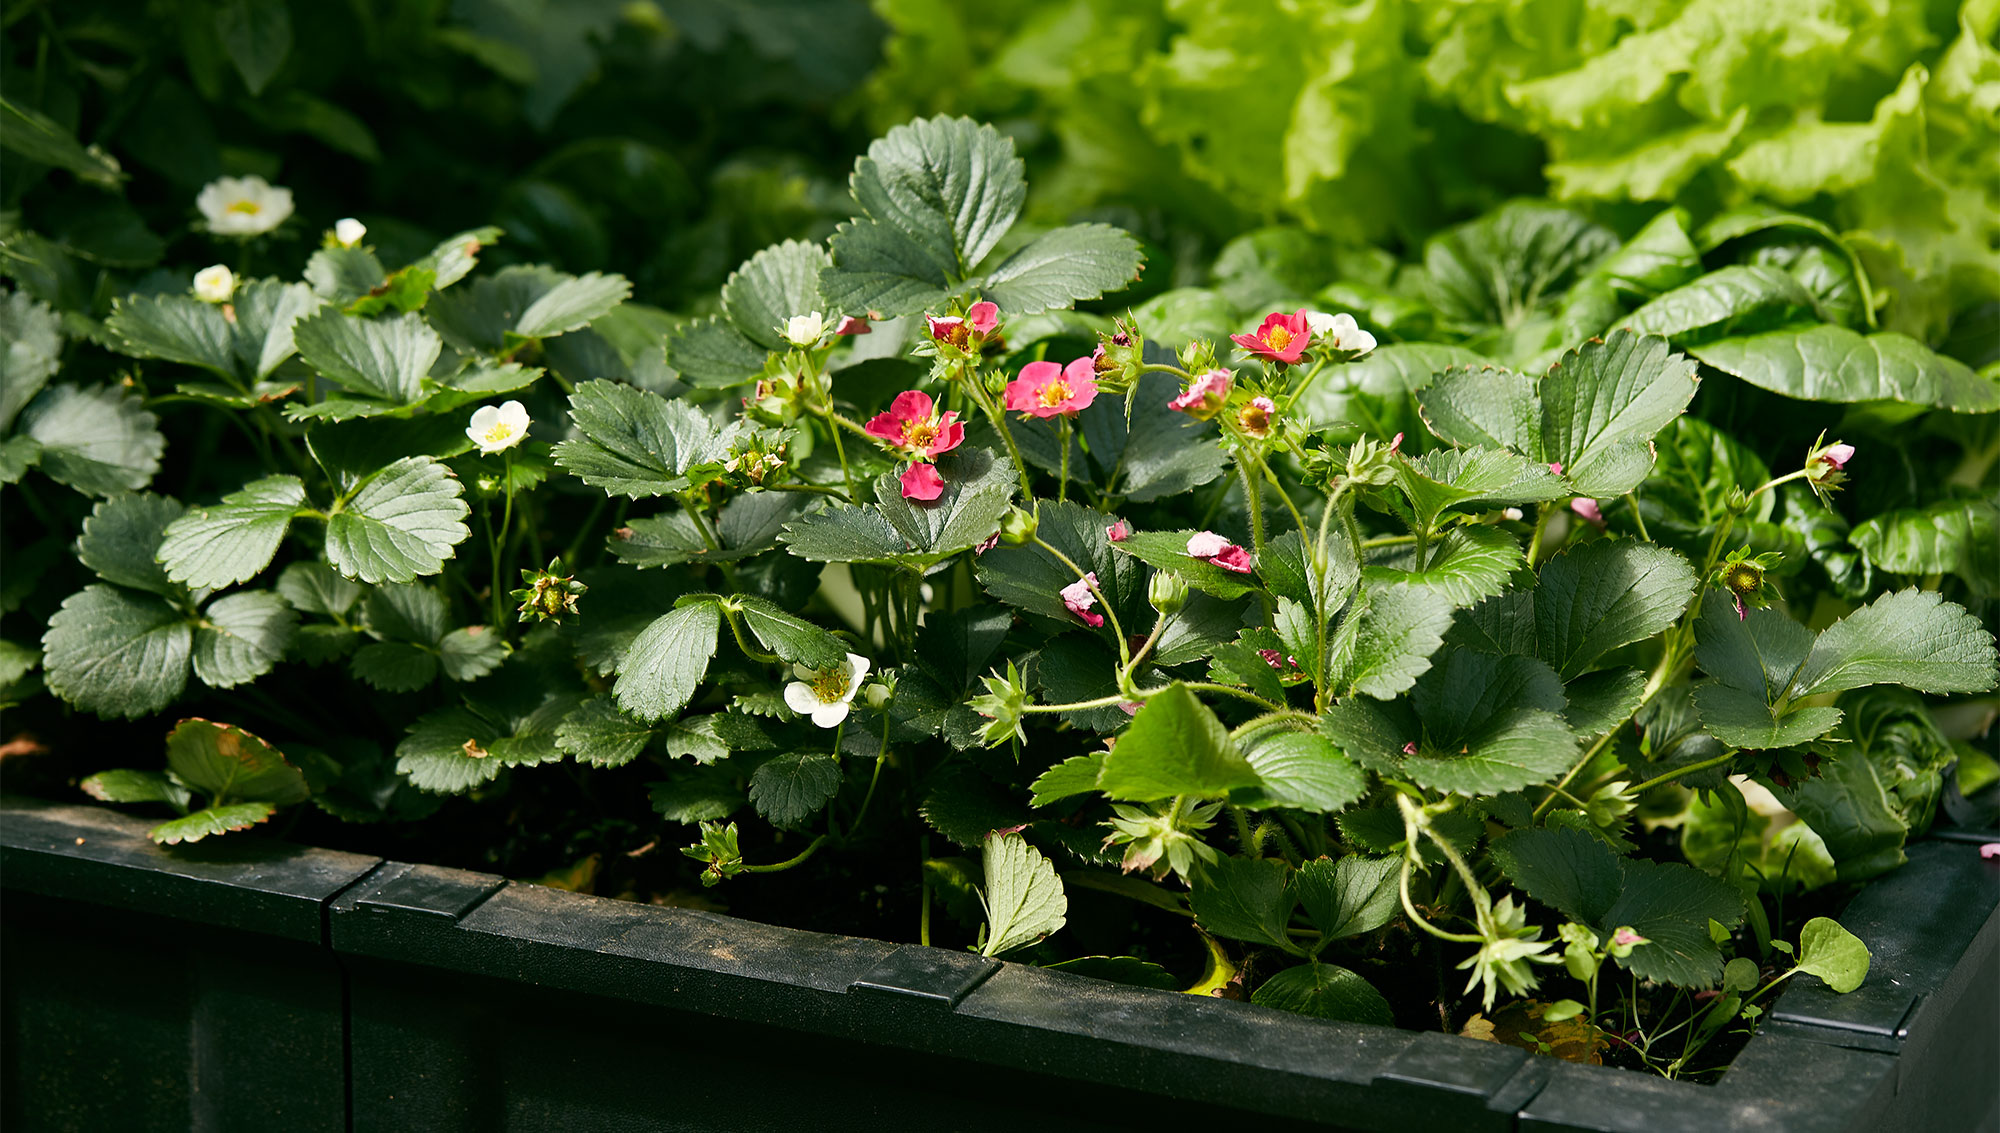 Strawberry plants growing in a raised-bed planter.